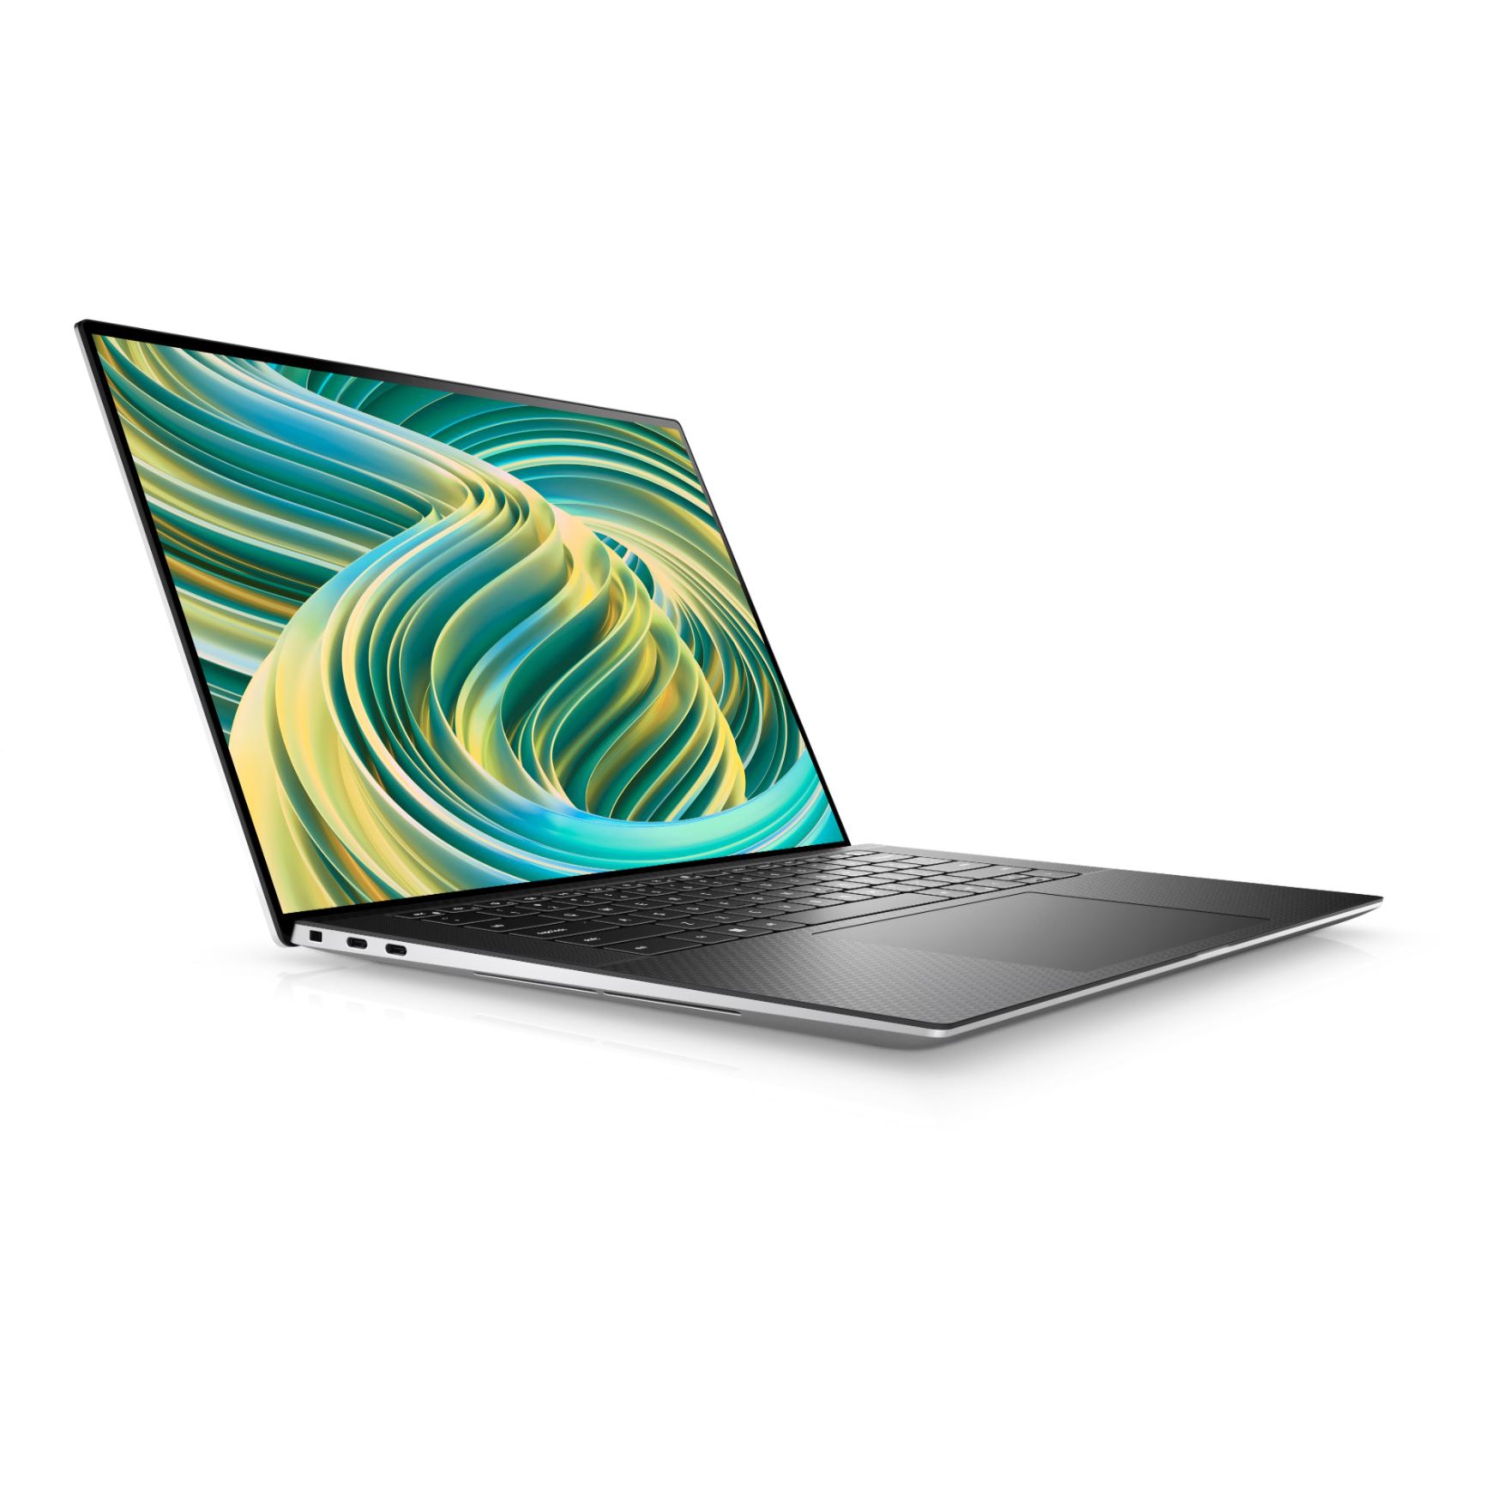 Refurbished (Excellent) Dell XPS 15 9530, 15" FHD, Nvidia RTX 4050, i7-13700H, 32GB RAM, 1TB SSD, WIN 11 HOME - Certified Refurbished